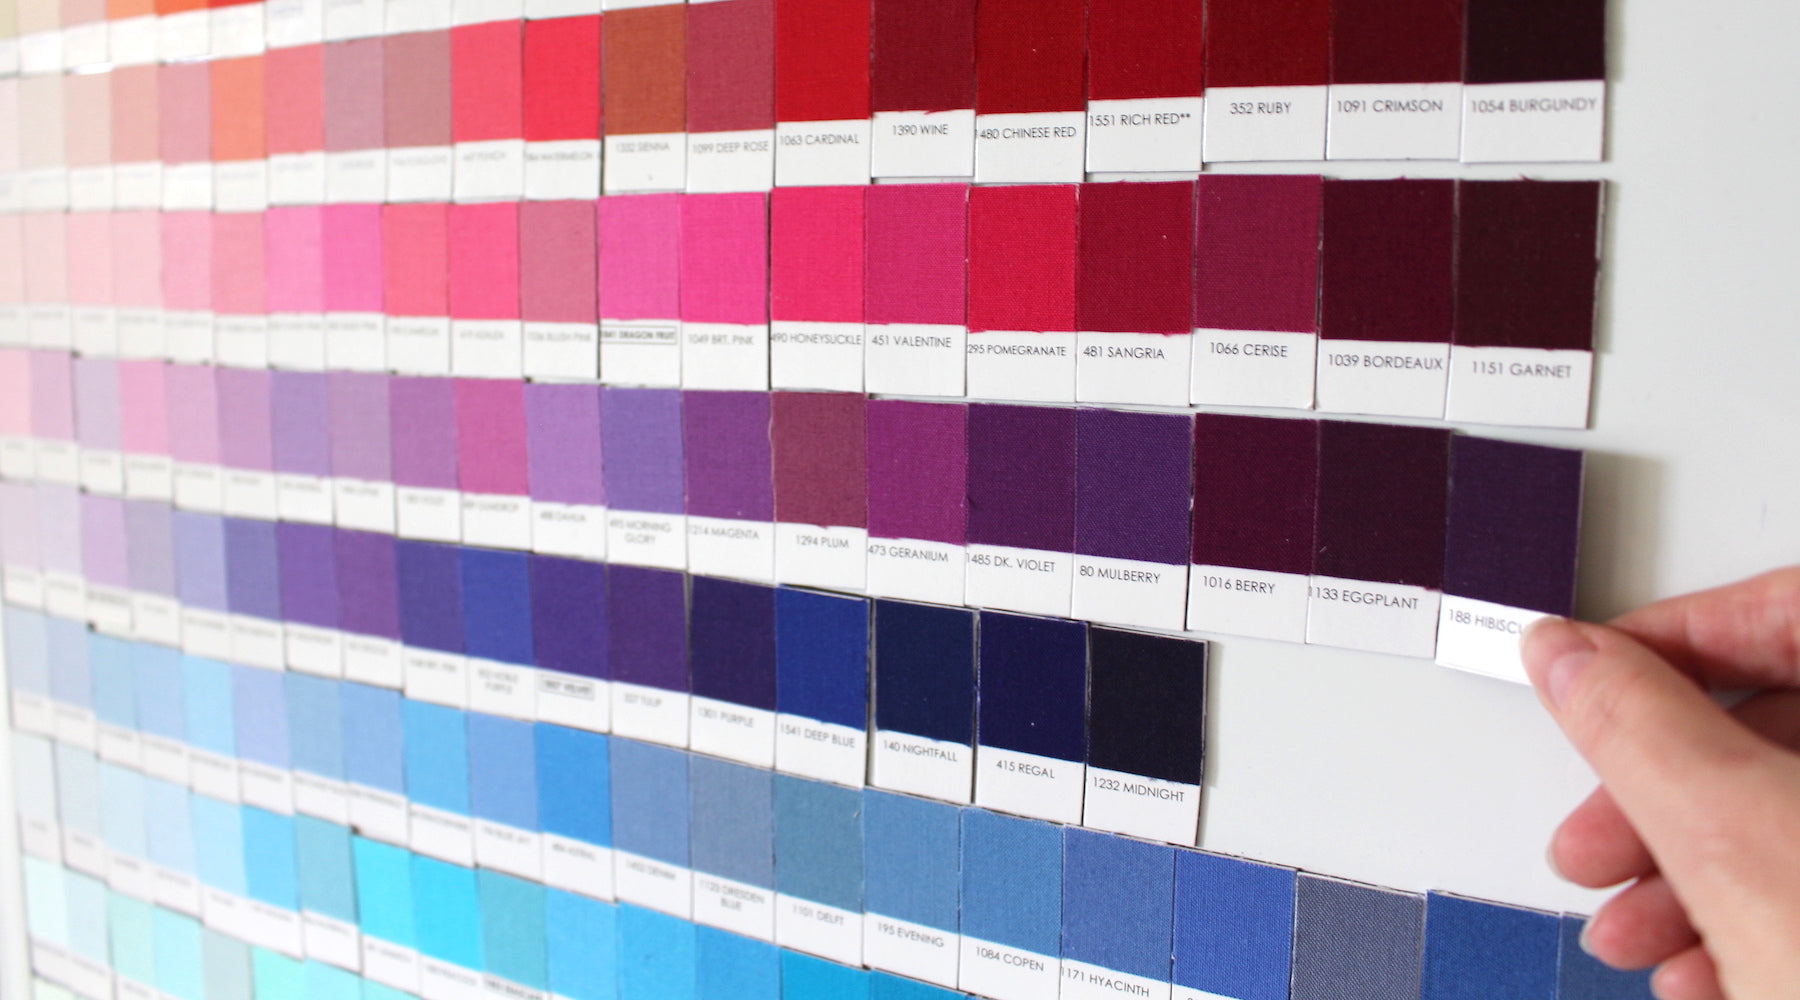 Wholesale cotton fabric swatch For A Wide Variety Of Items 